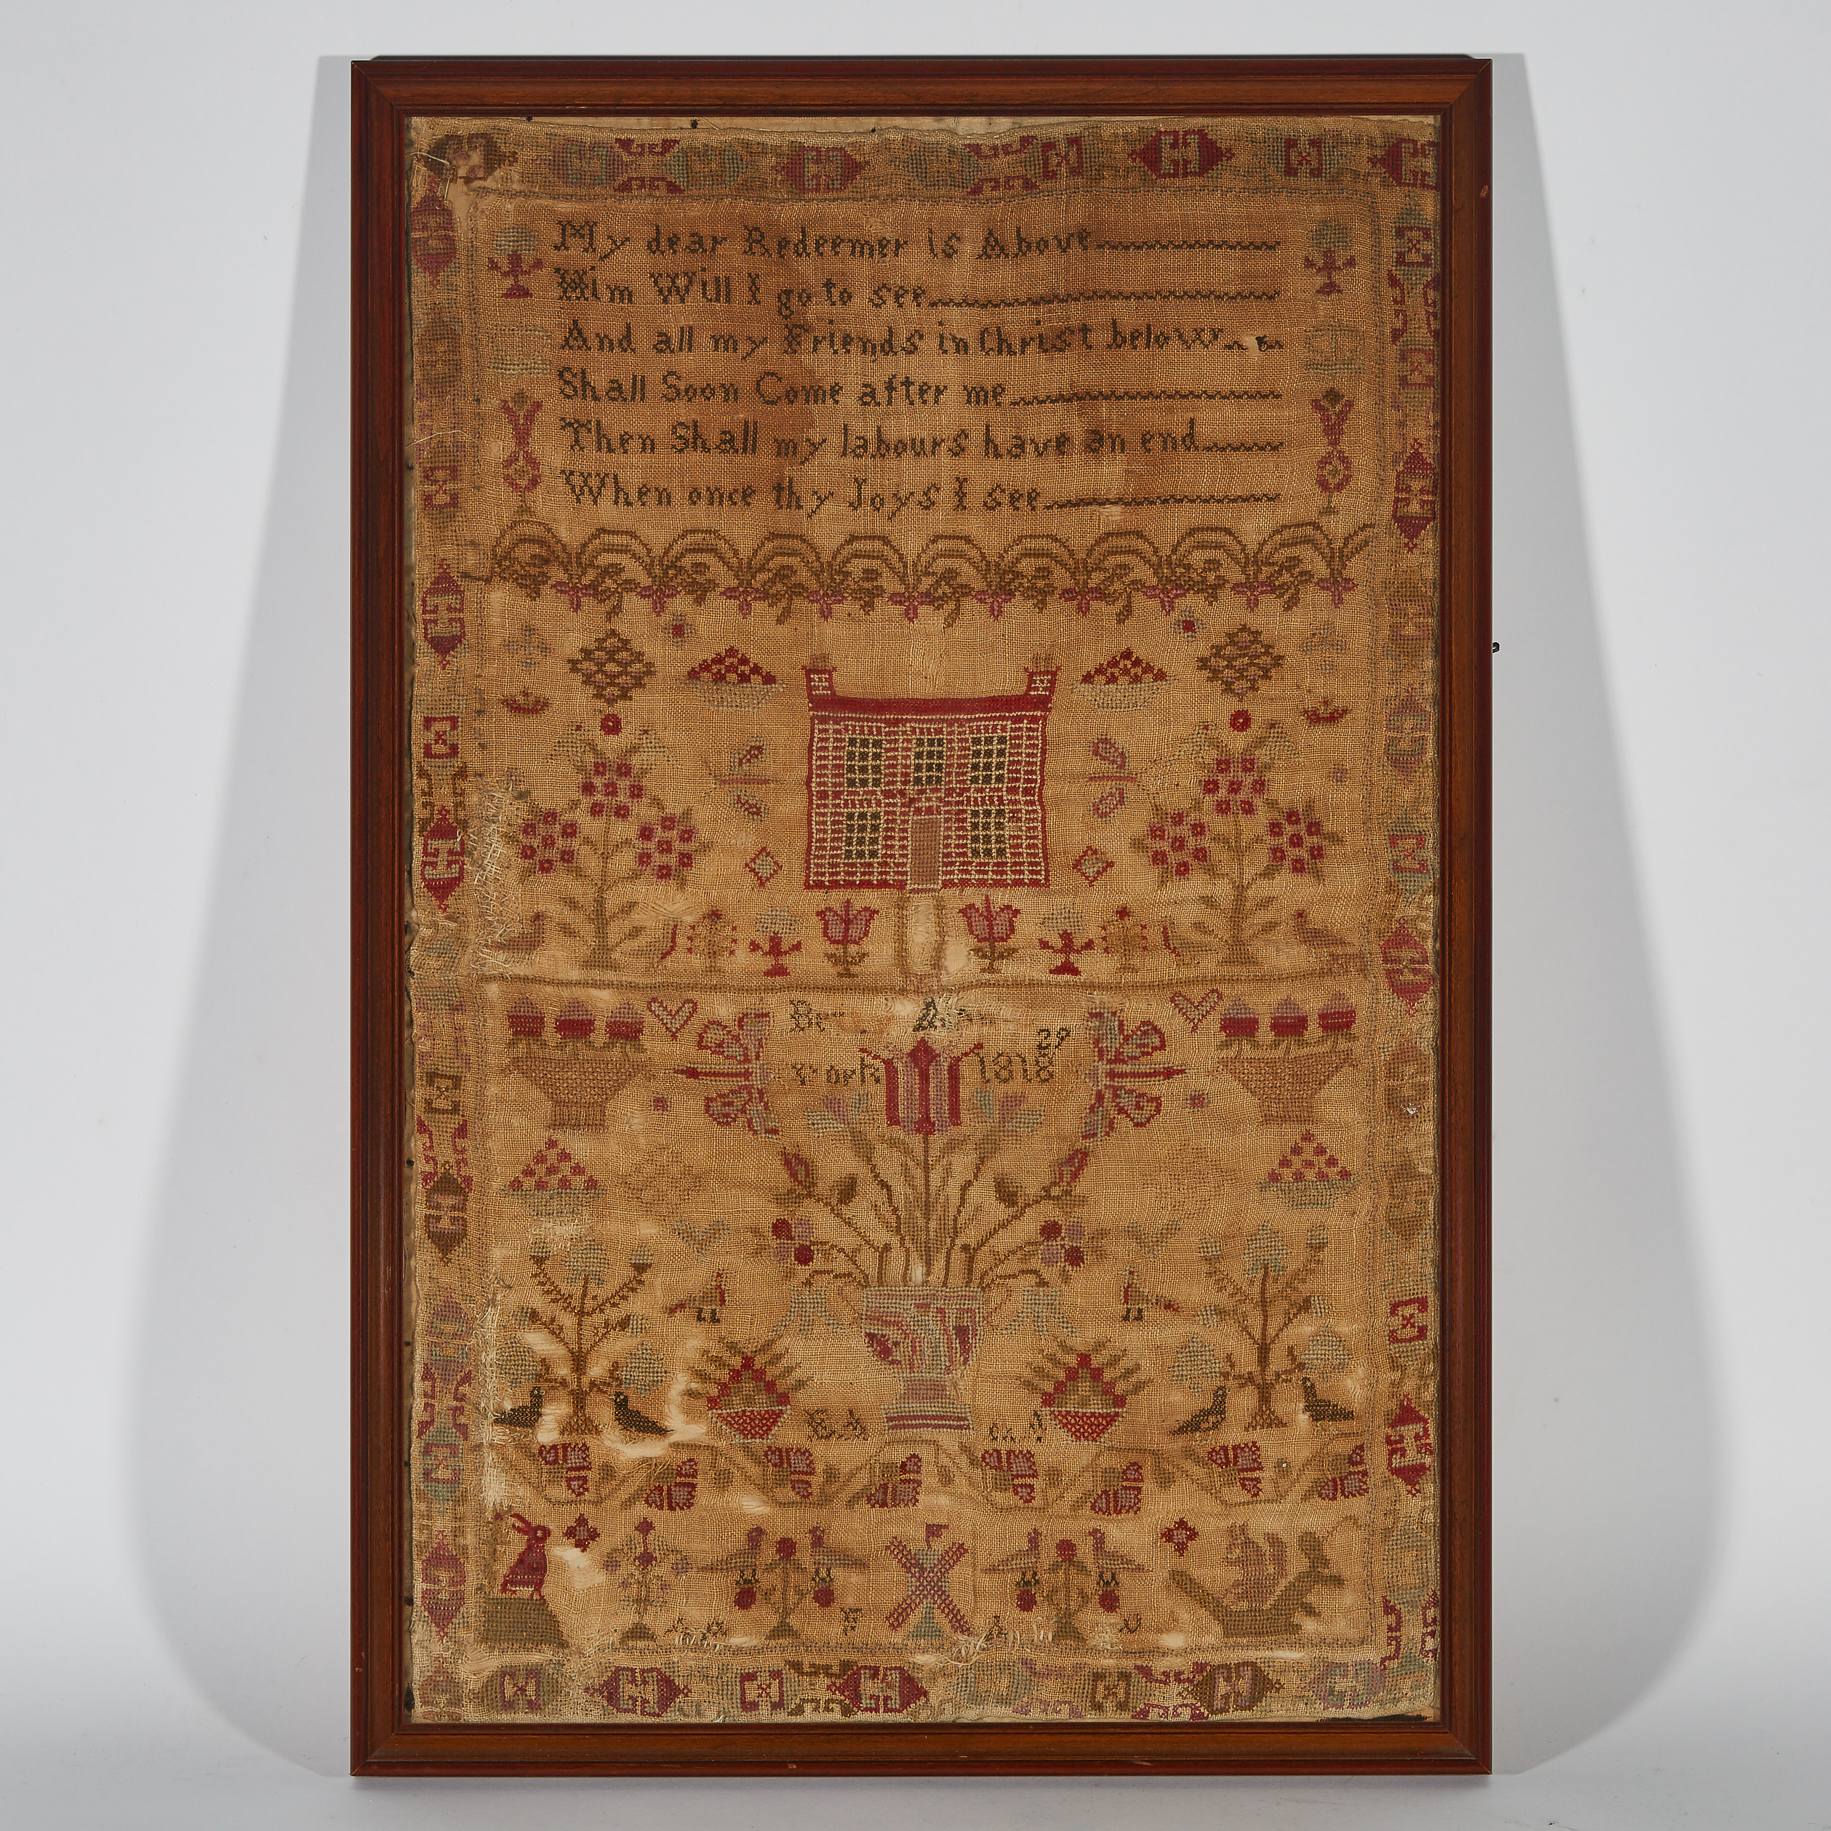 Georgian Canadian Needle Work Pictorial Sampler with Prayer, Signed Indistinctly, York, 1818